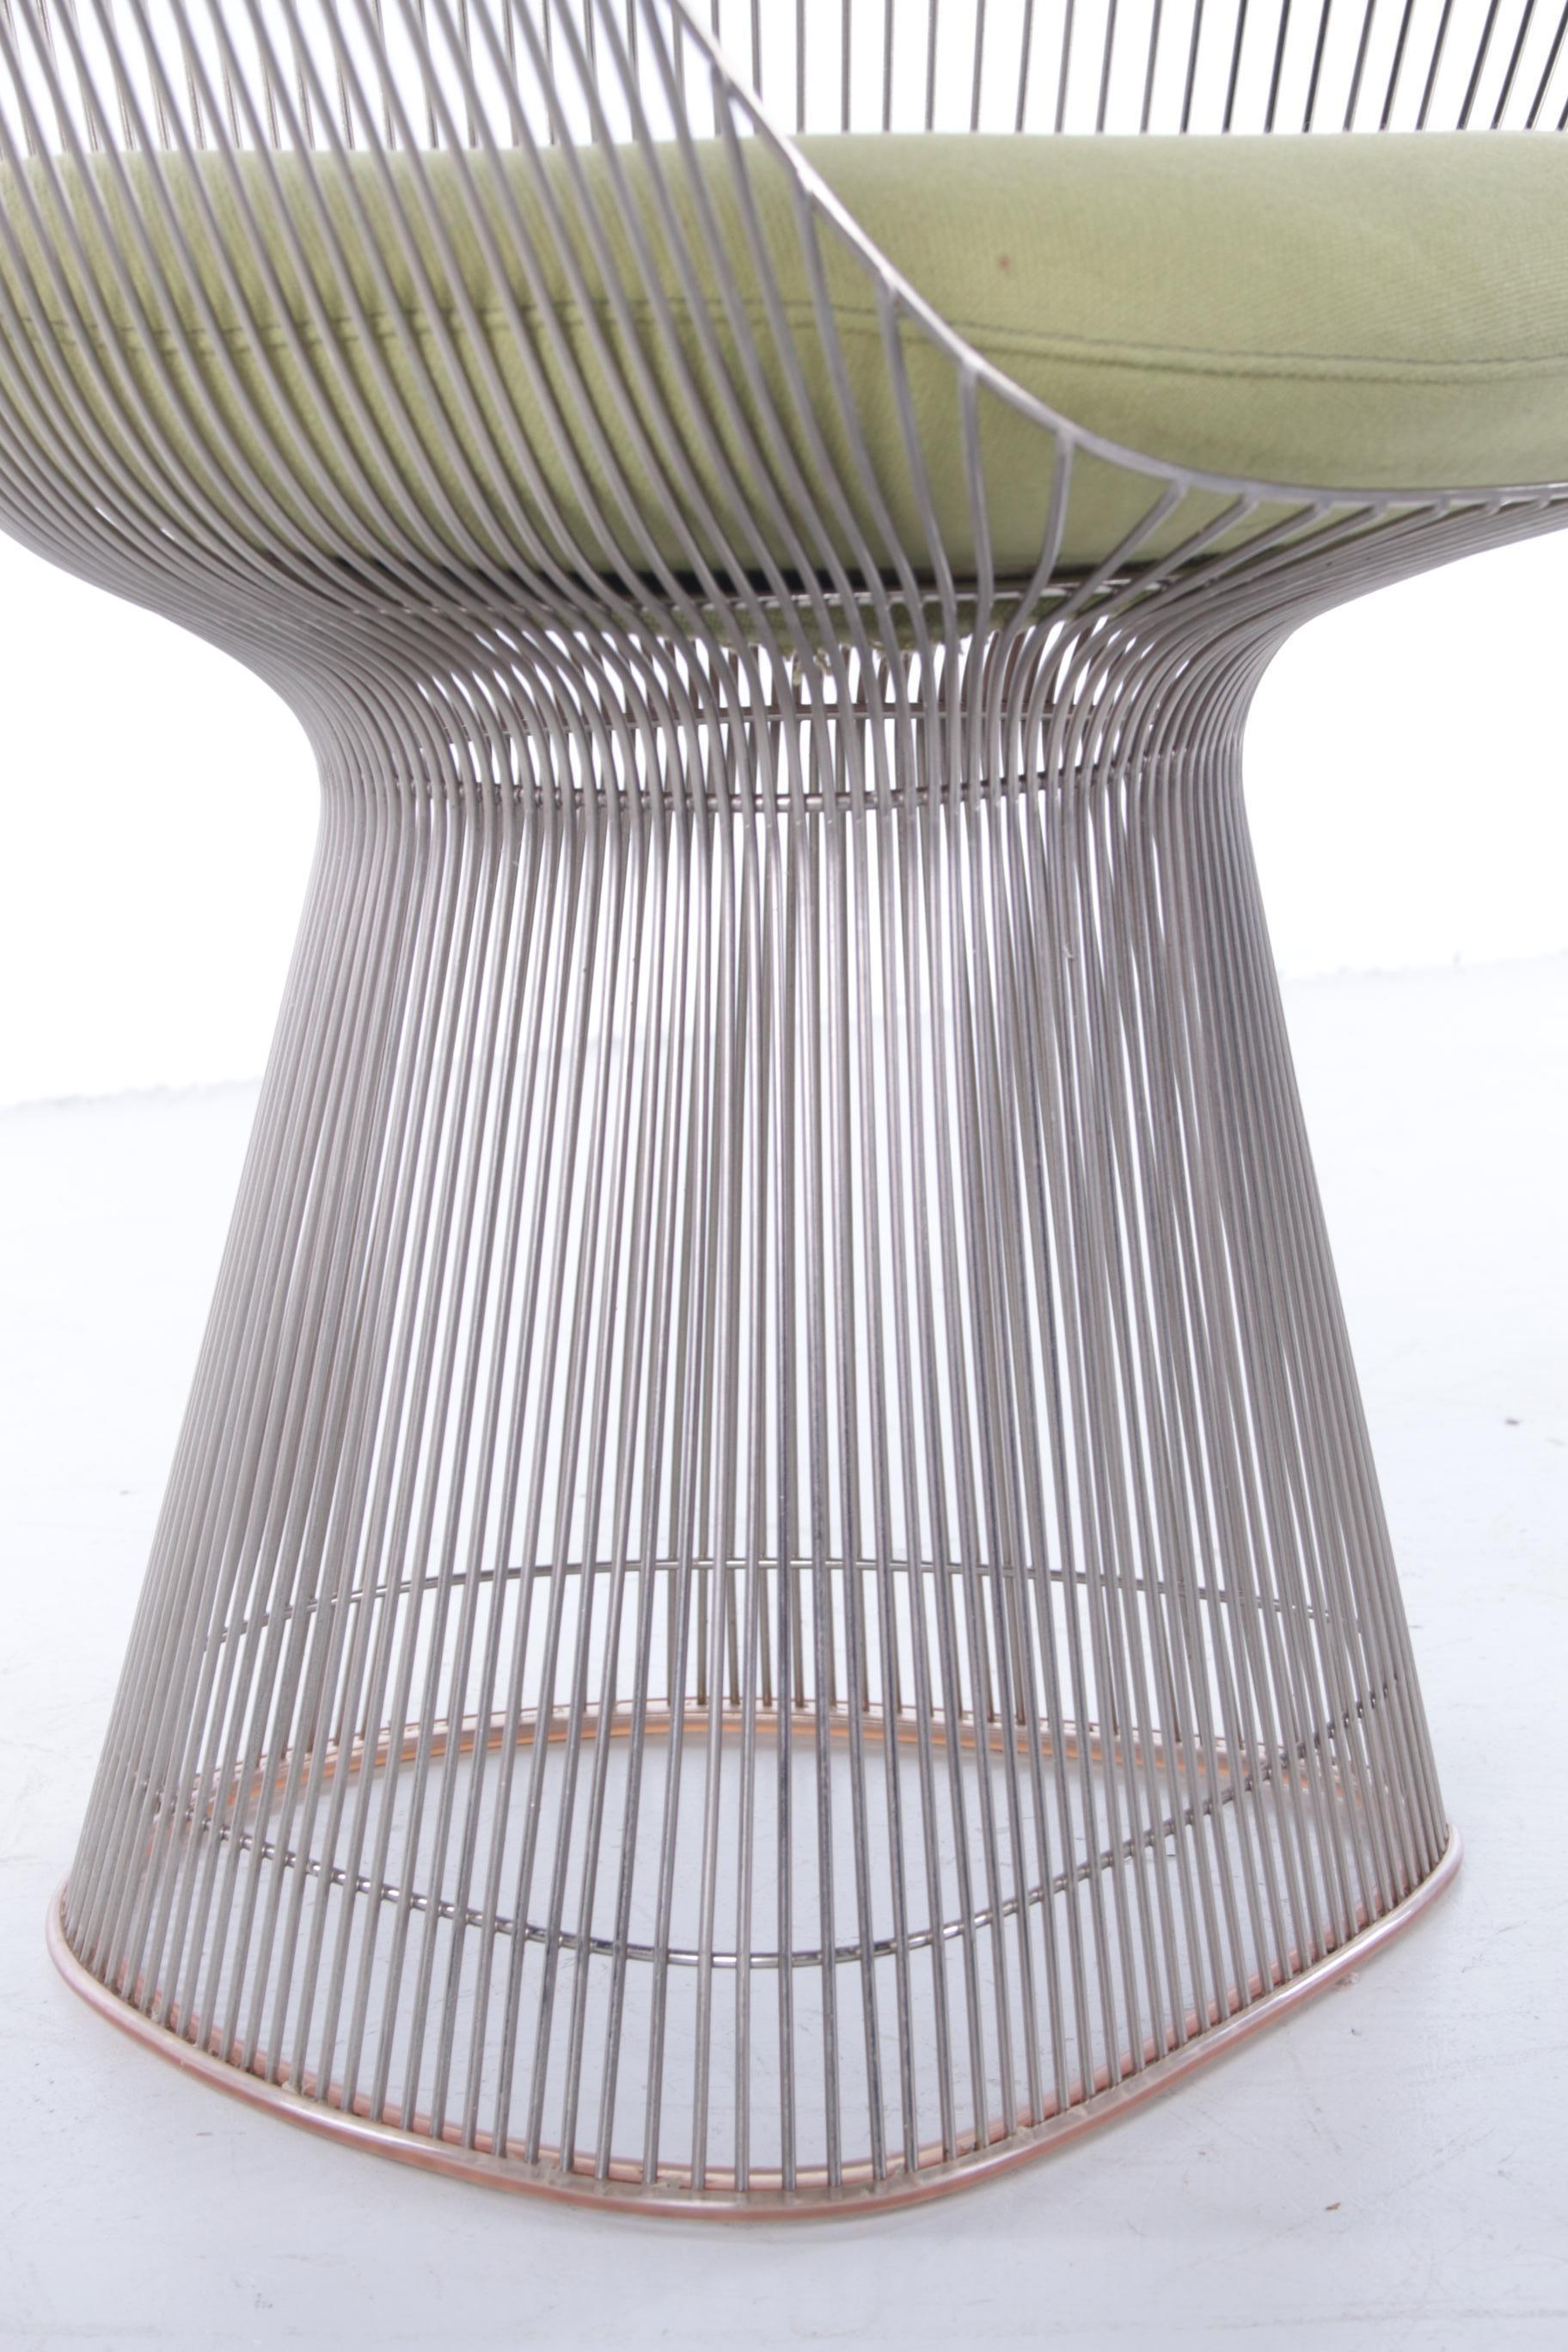 Set Rare Warren Platner Chair for Knoll In Good Condition In Oostrum-Venray, NL